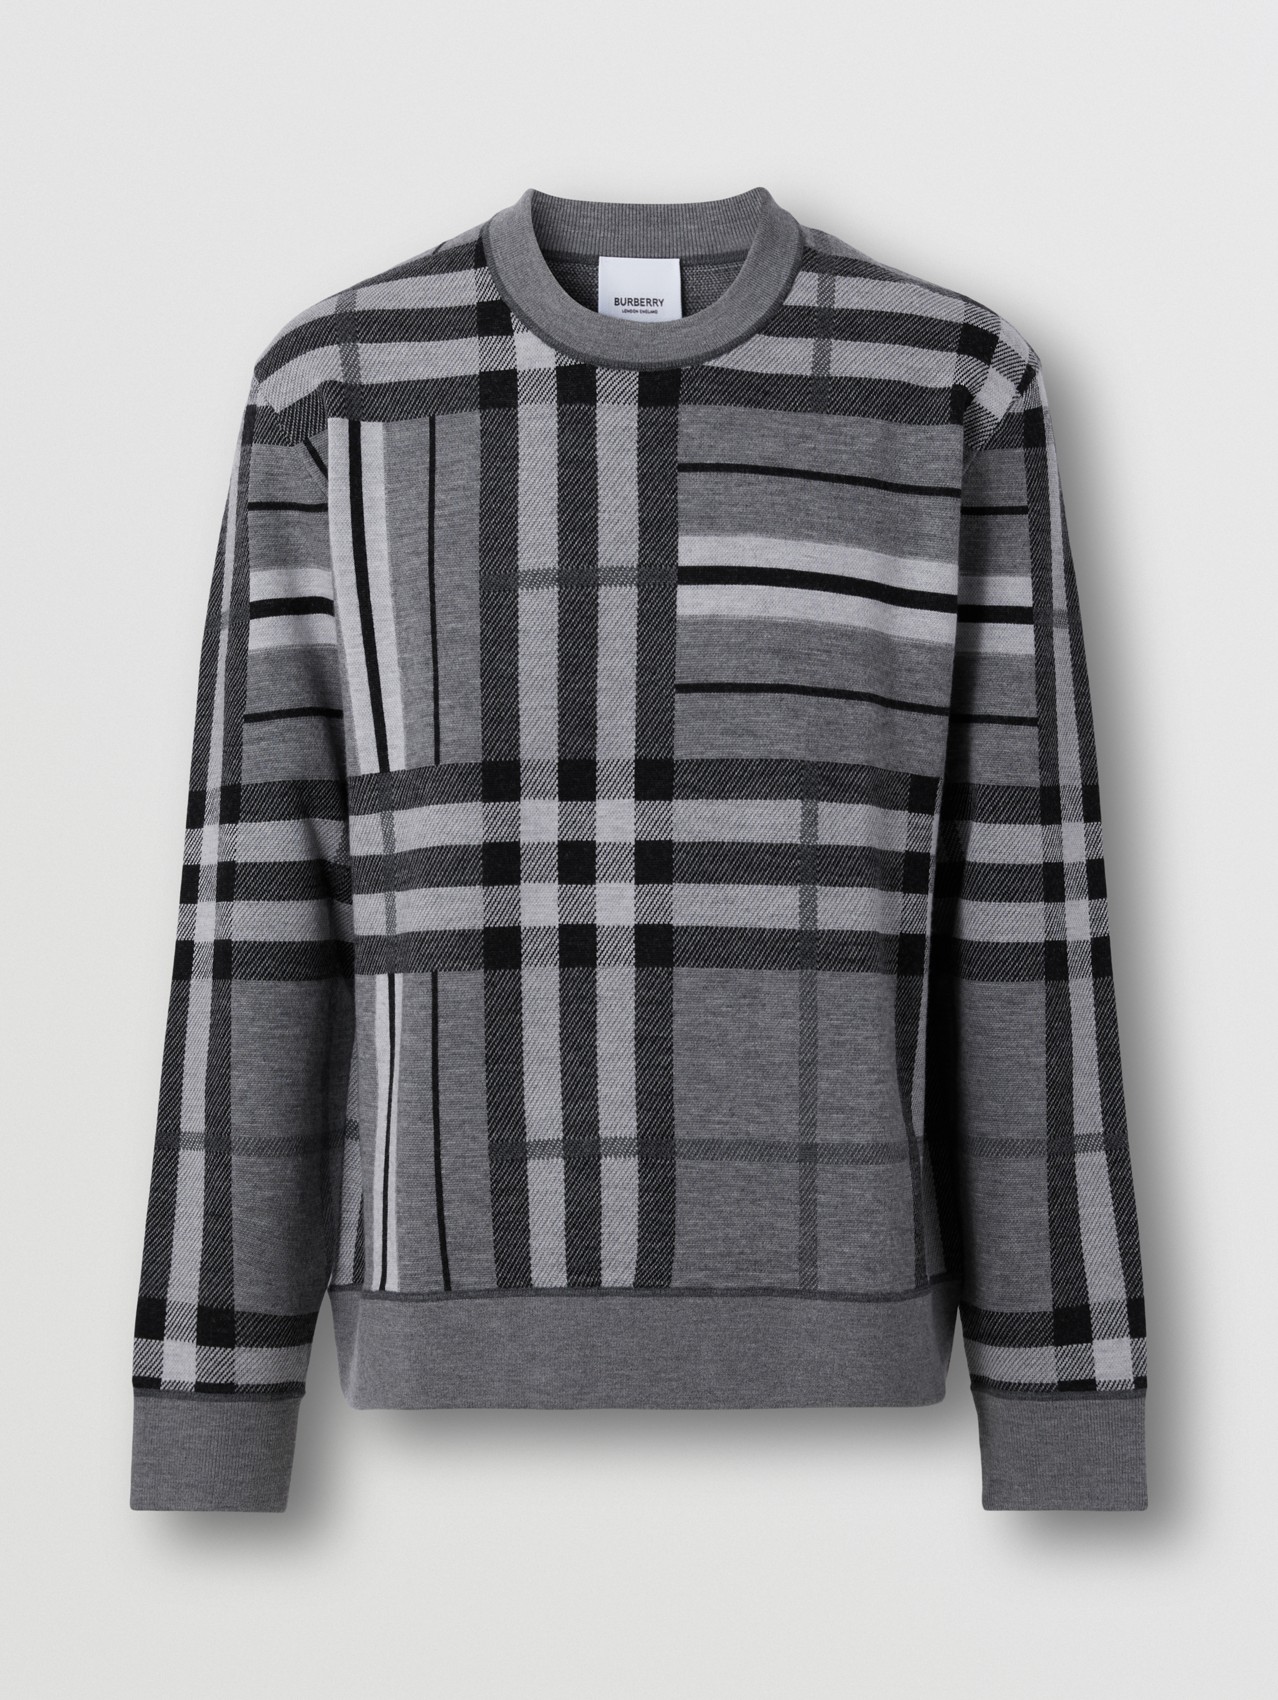 Mens Sweaters and knitwear Burberry Sweaters and knitwear Burberry Sweater in Black for Men Save 52% 